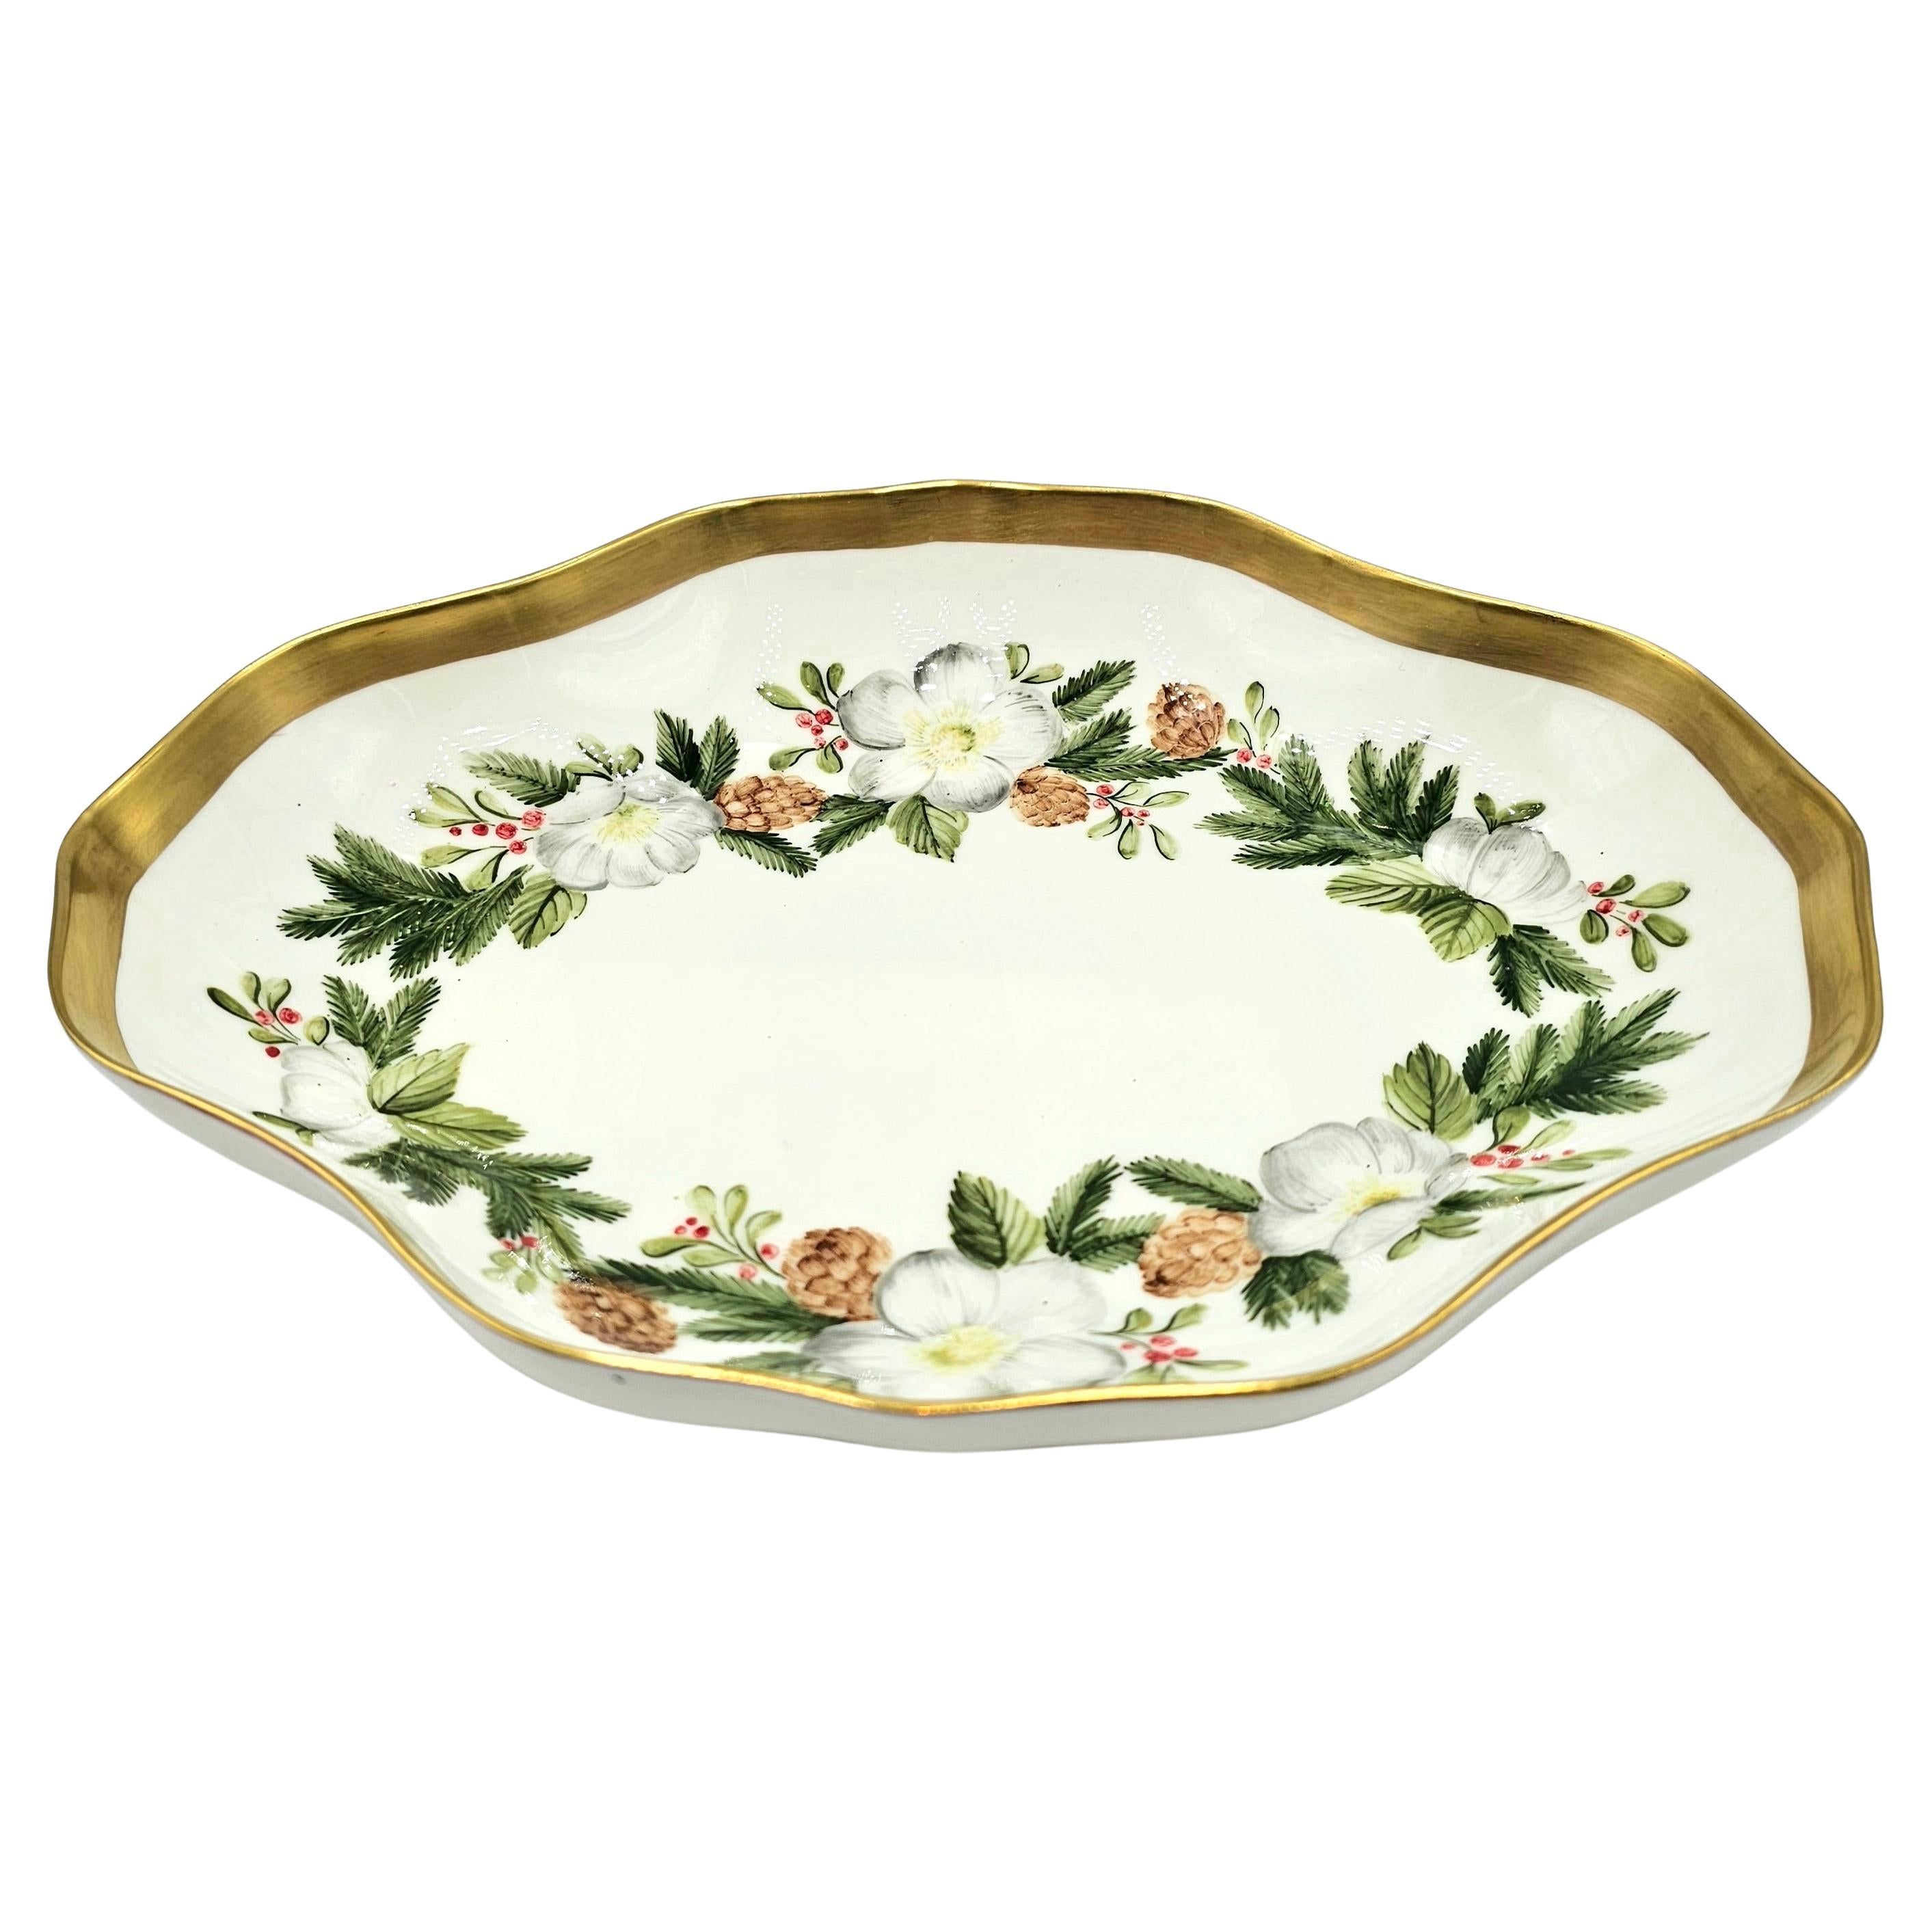 Country Style Christmas Decor Porcelain Pastry Dish Sofina Boutique Kitzbuehel For Sale